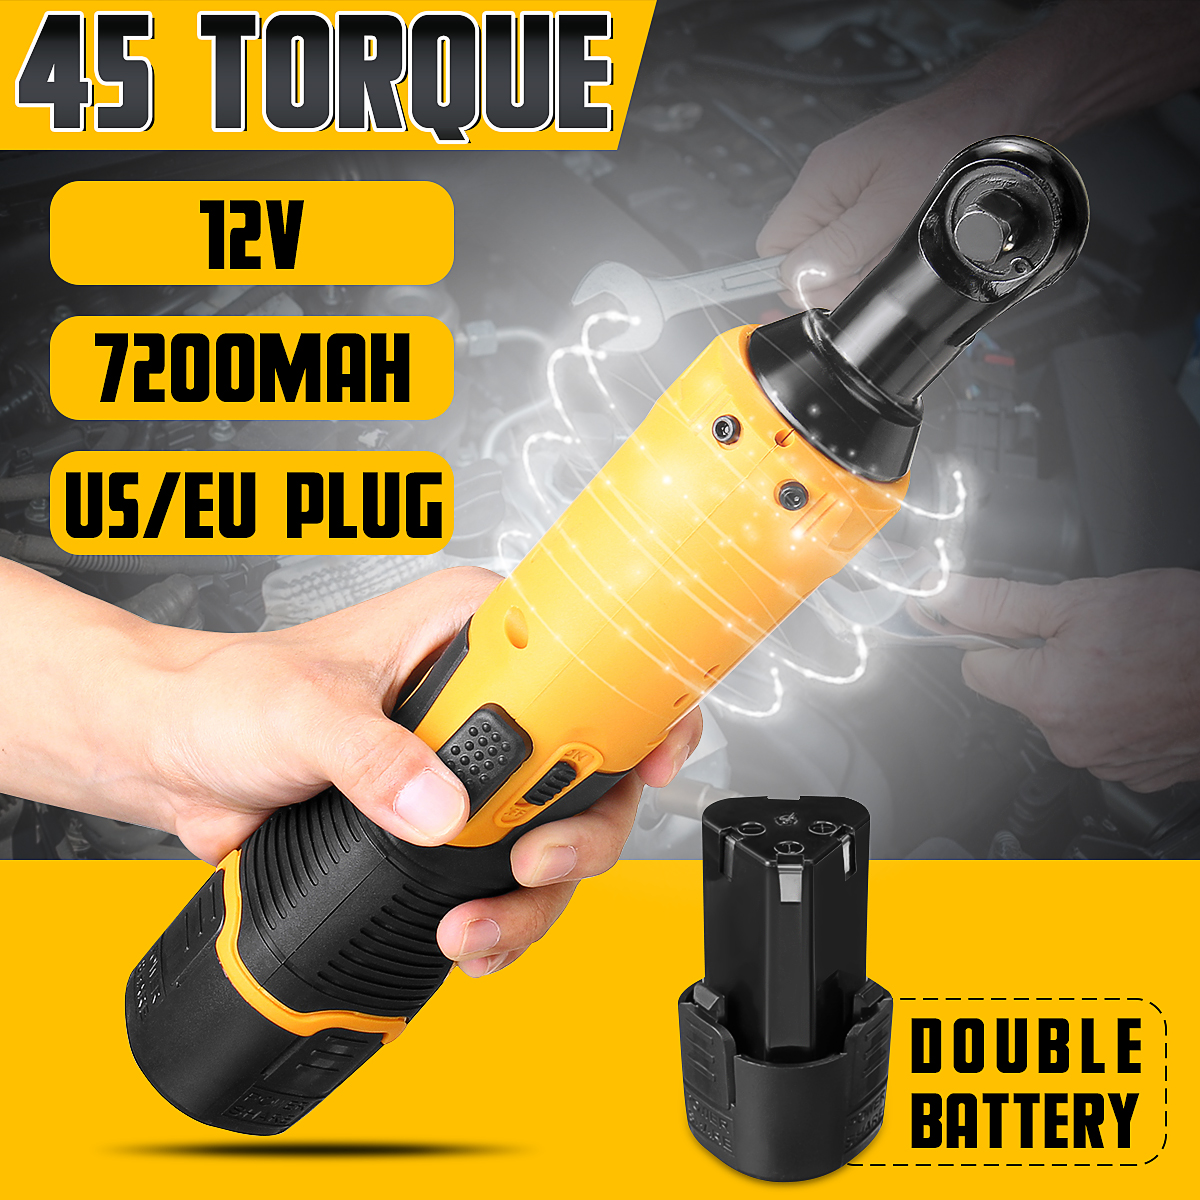 7200mah-Power-Cordless-Ratchet-Wrench-38quot-12V-Li-ion-Electric-Wrench-Max-Torque-45-Compact-Size-1560566-2